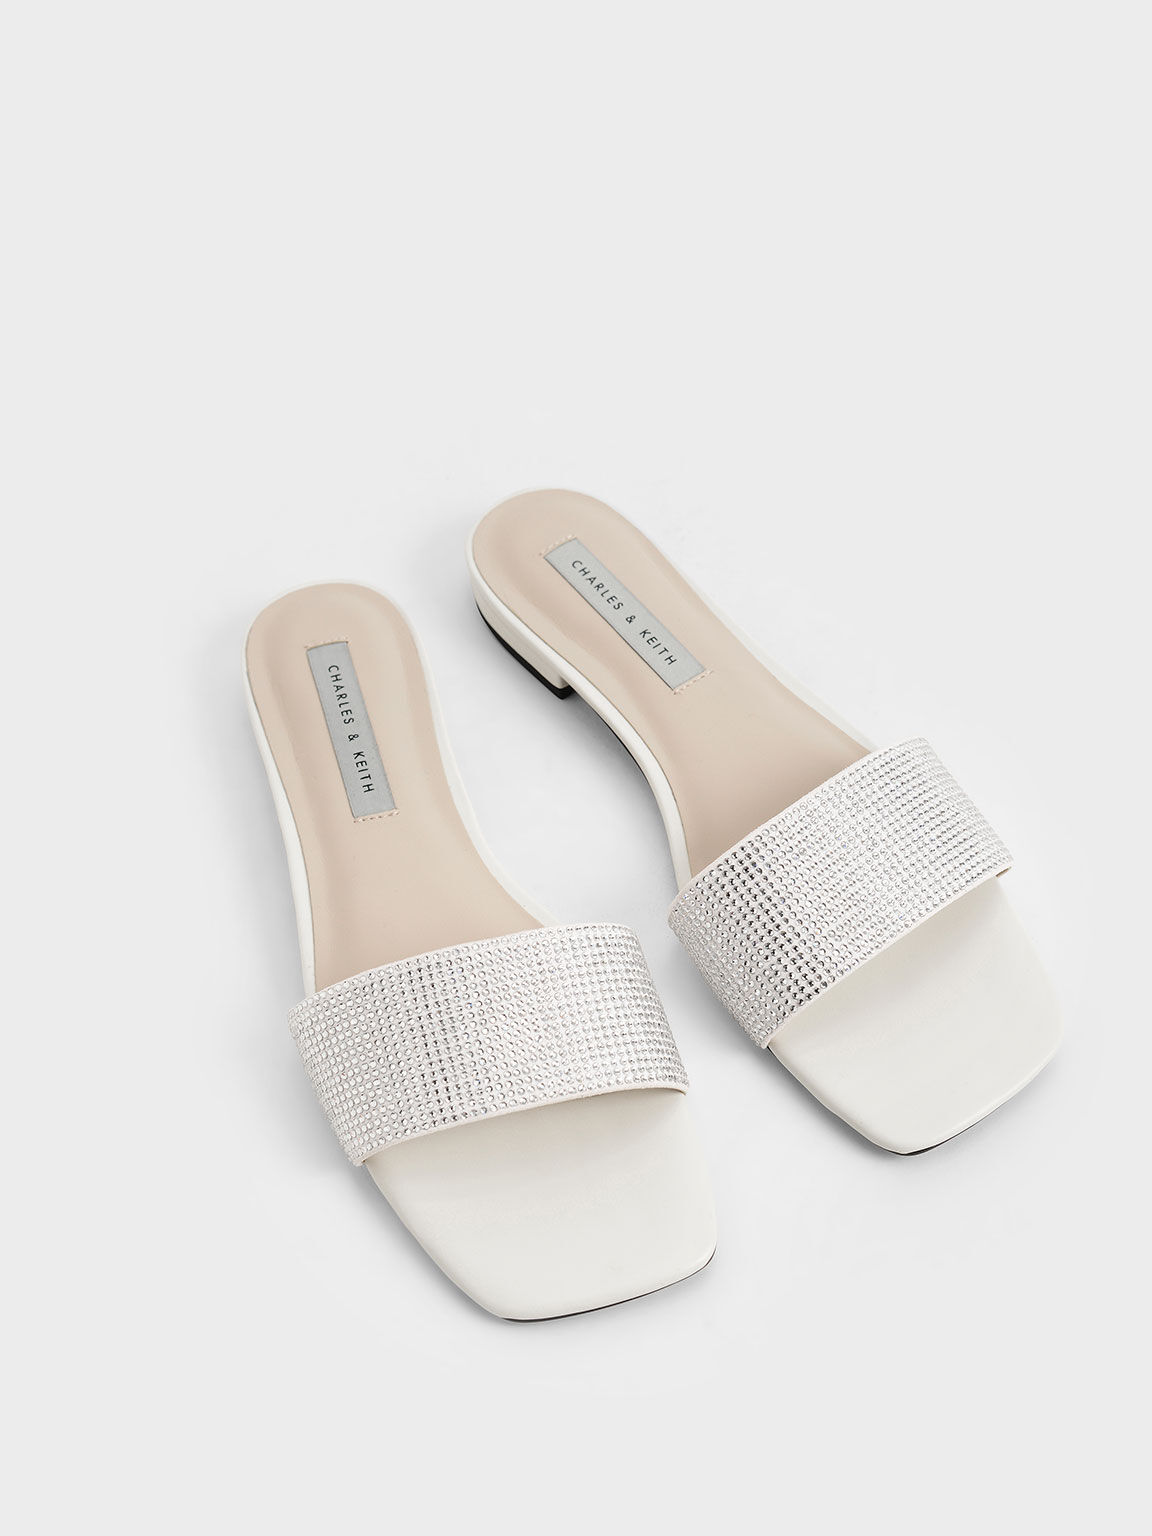 Women's Sandals | Shop Exclusive Styles | CHARLES & KEITH US